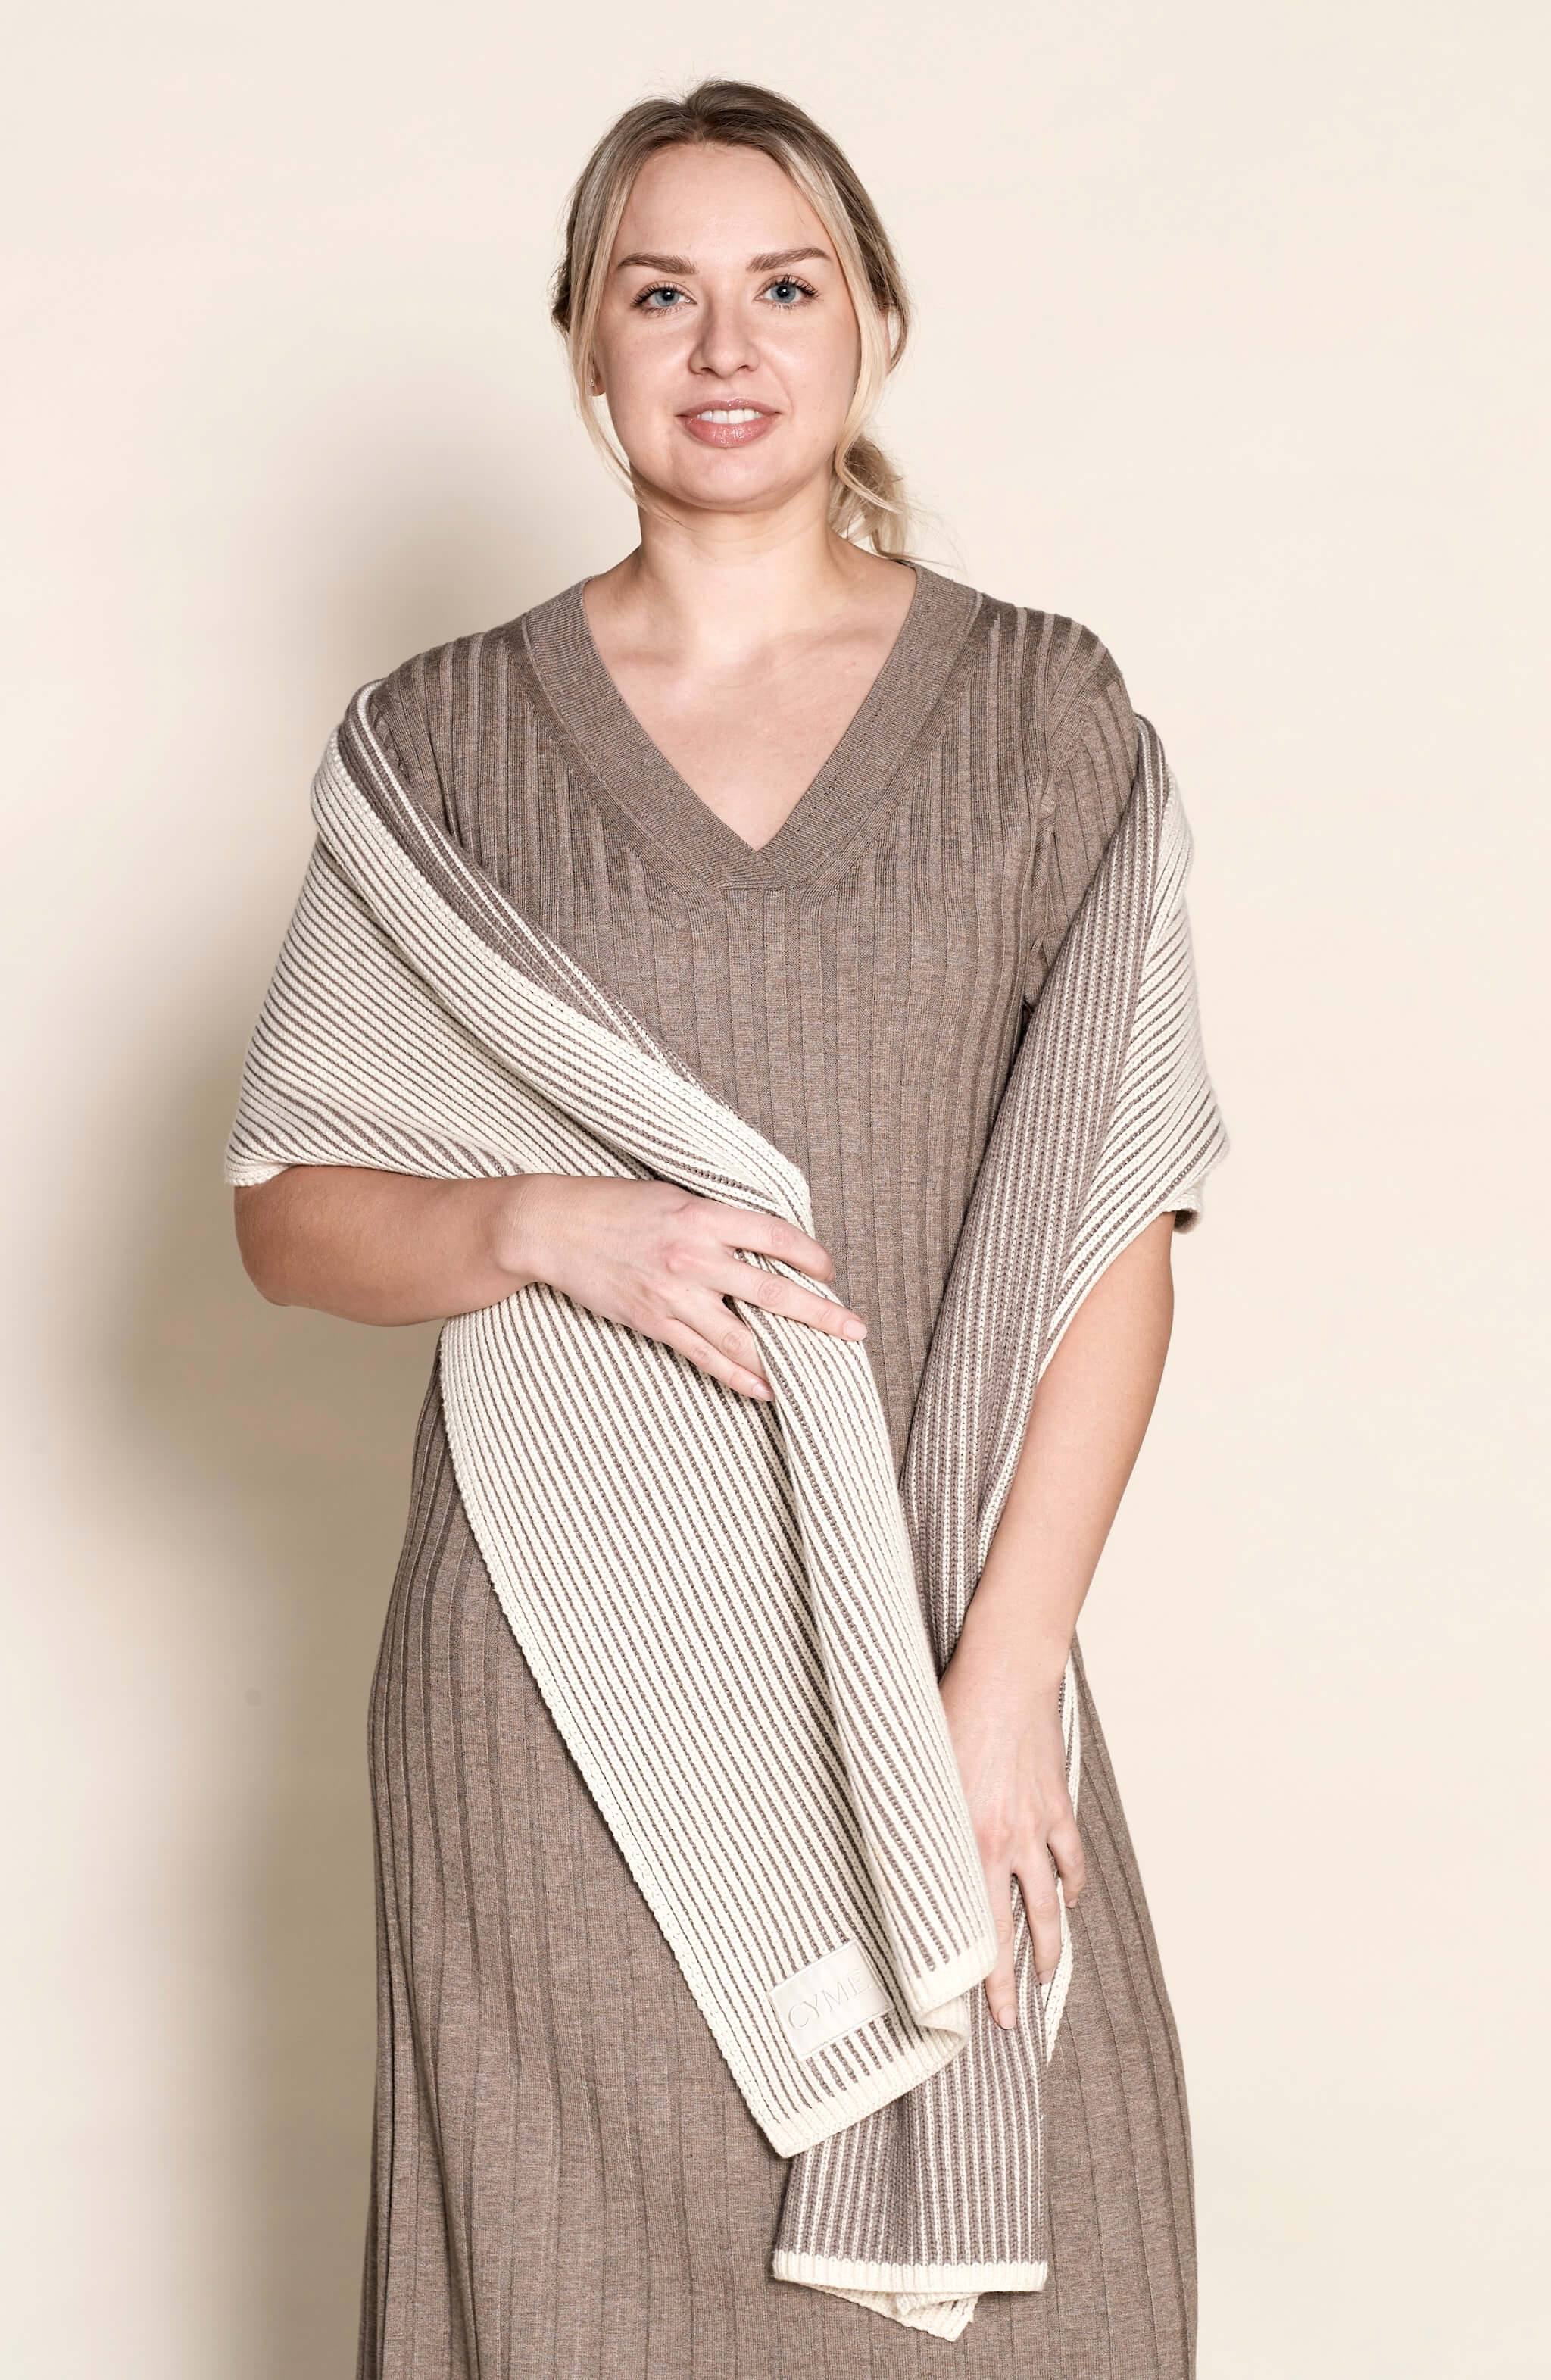 Model draped in a Cyme Copenhagen luxurious cashmere knit dress paired with a contrasting striped scarf, showcasing the fusion of natural materials and timeless fashion in Danish design.